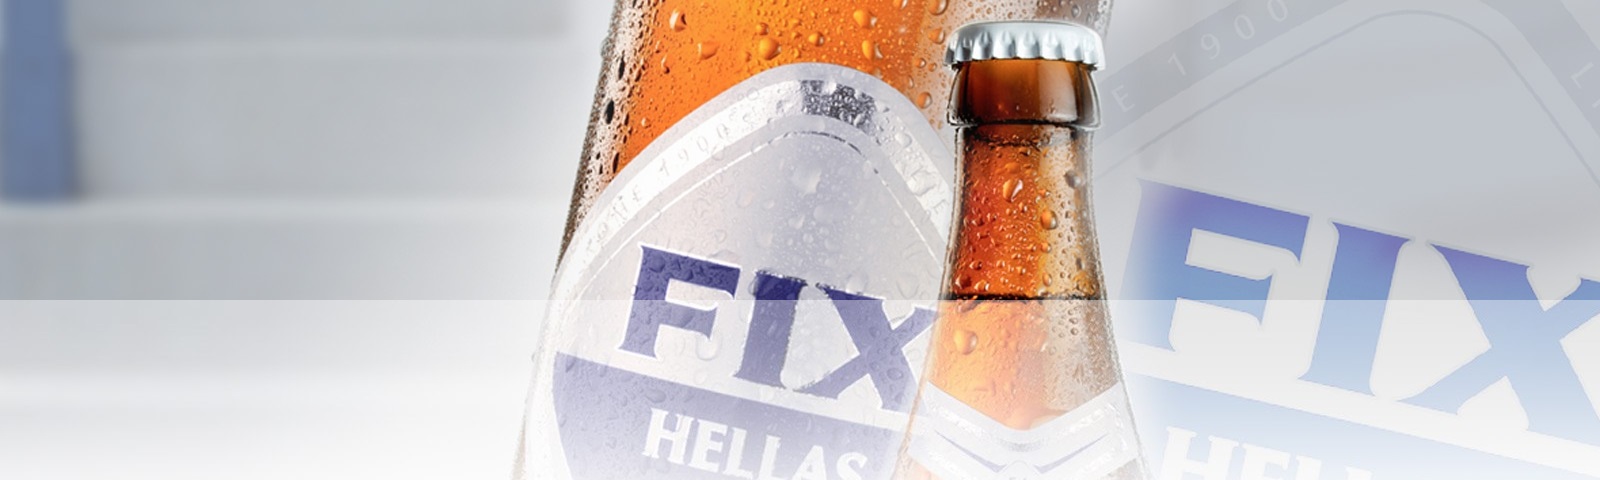 PRODUCTS » FIX » FIX Hellas « OLYMPIC Brewery